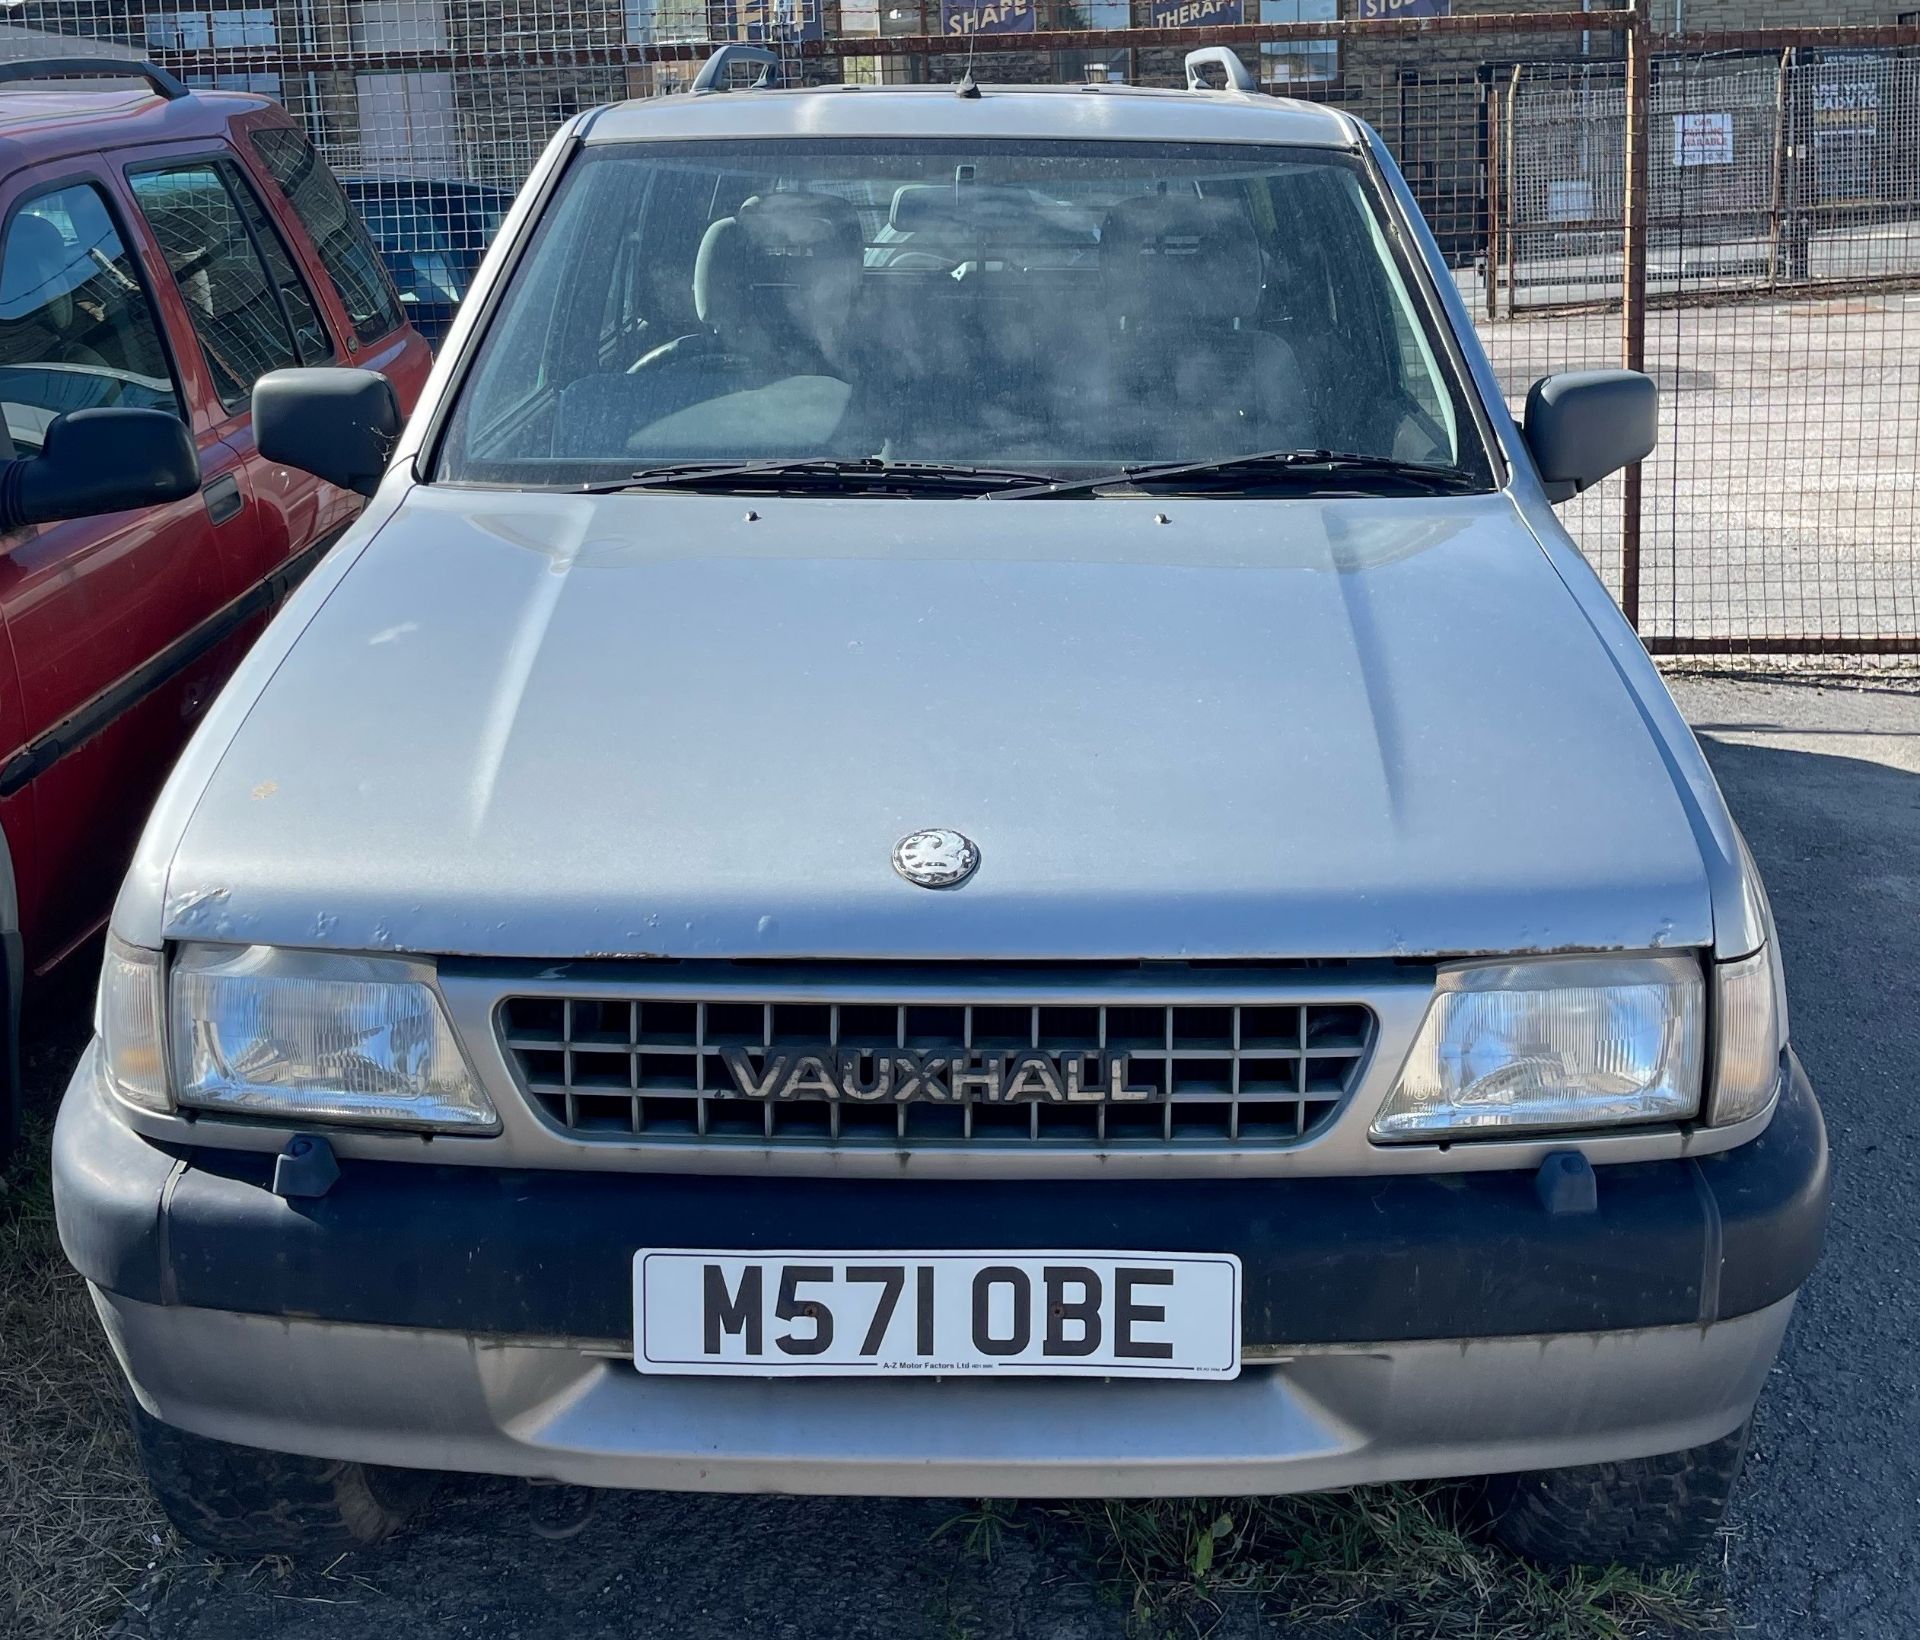 PROJECT VEHICLE FOR RESTORATION/SPARES/REPAIRS - VAUXHALL FRONTERA 2.4i ESTATE - Petrol - Grey.